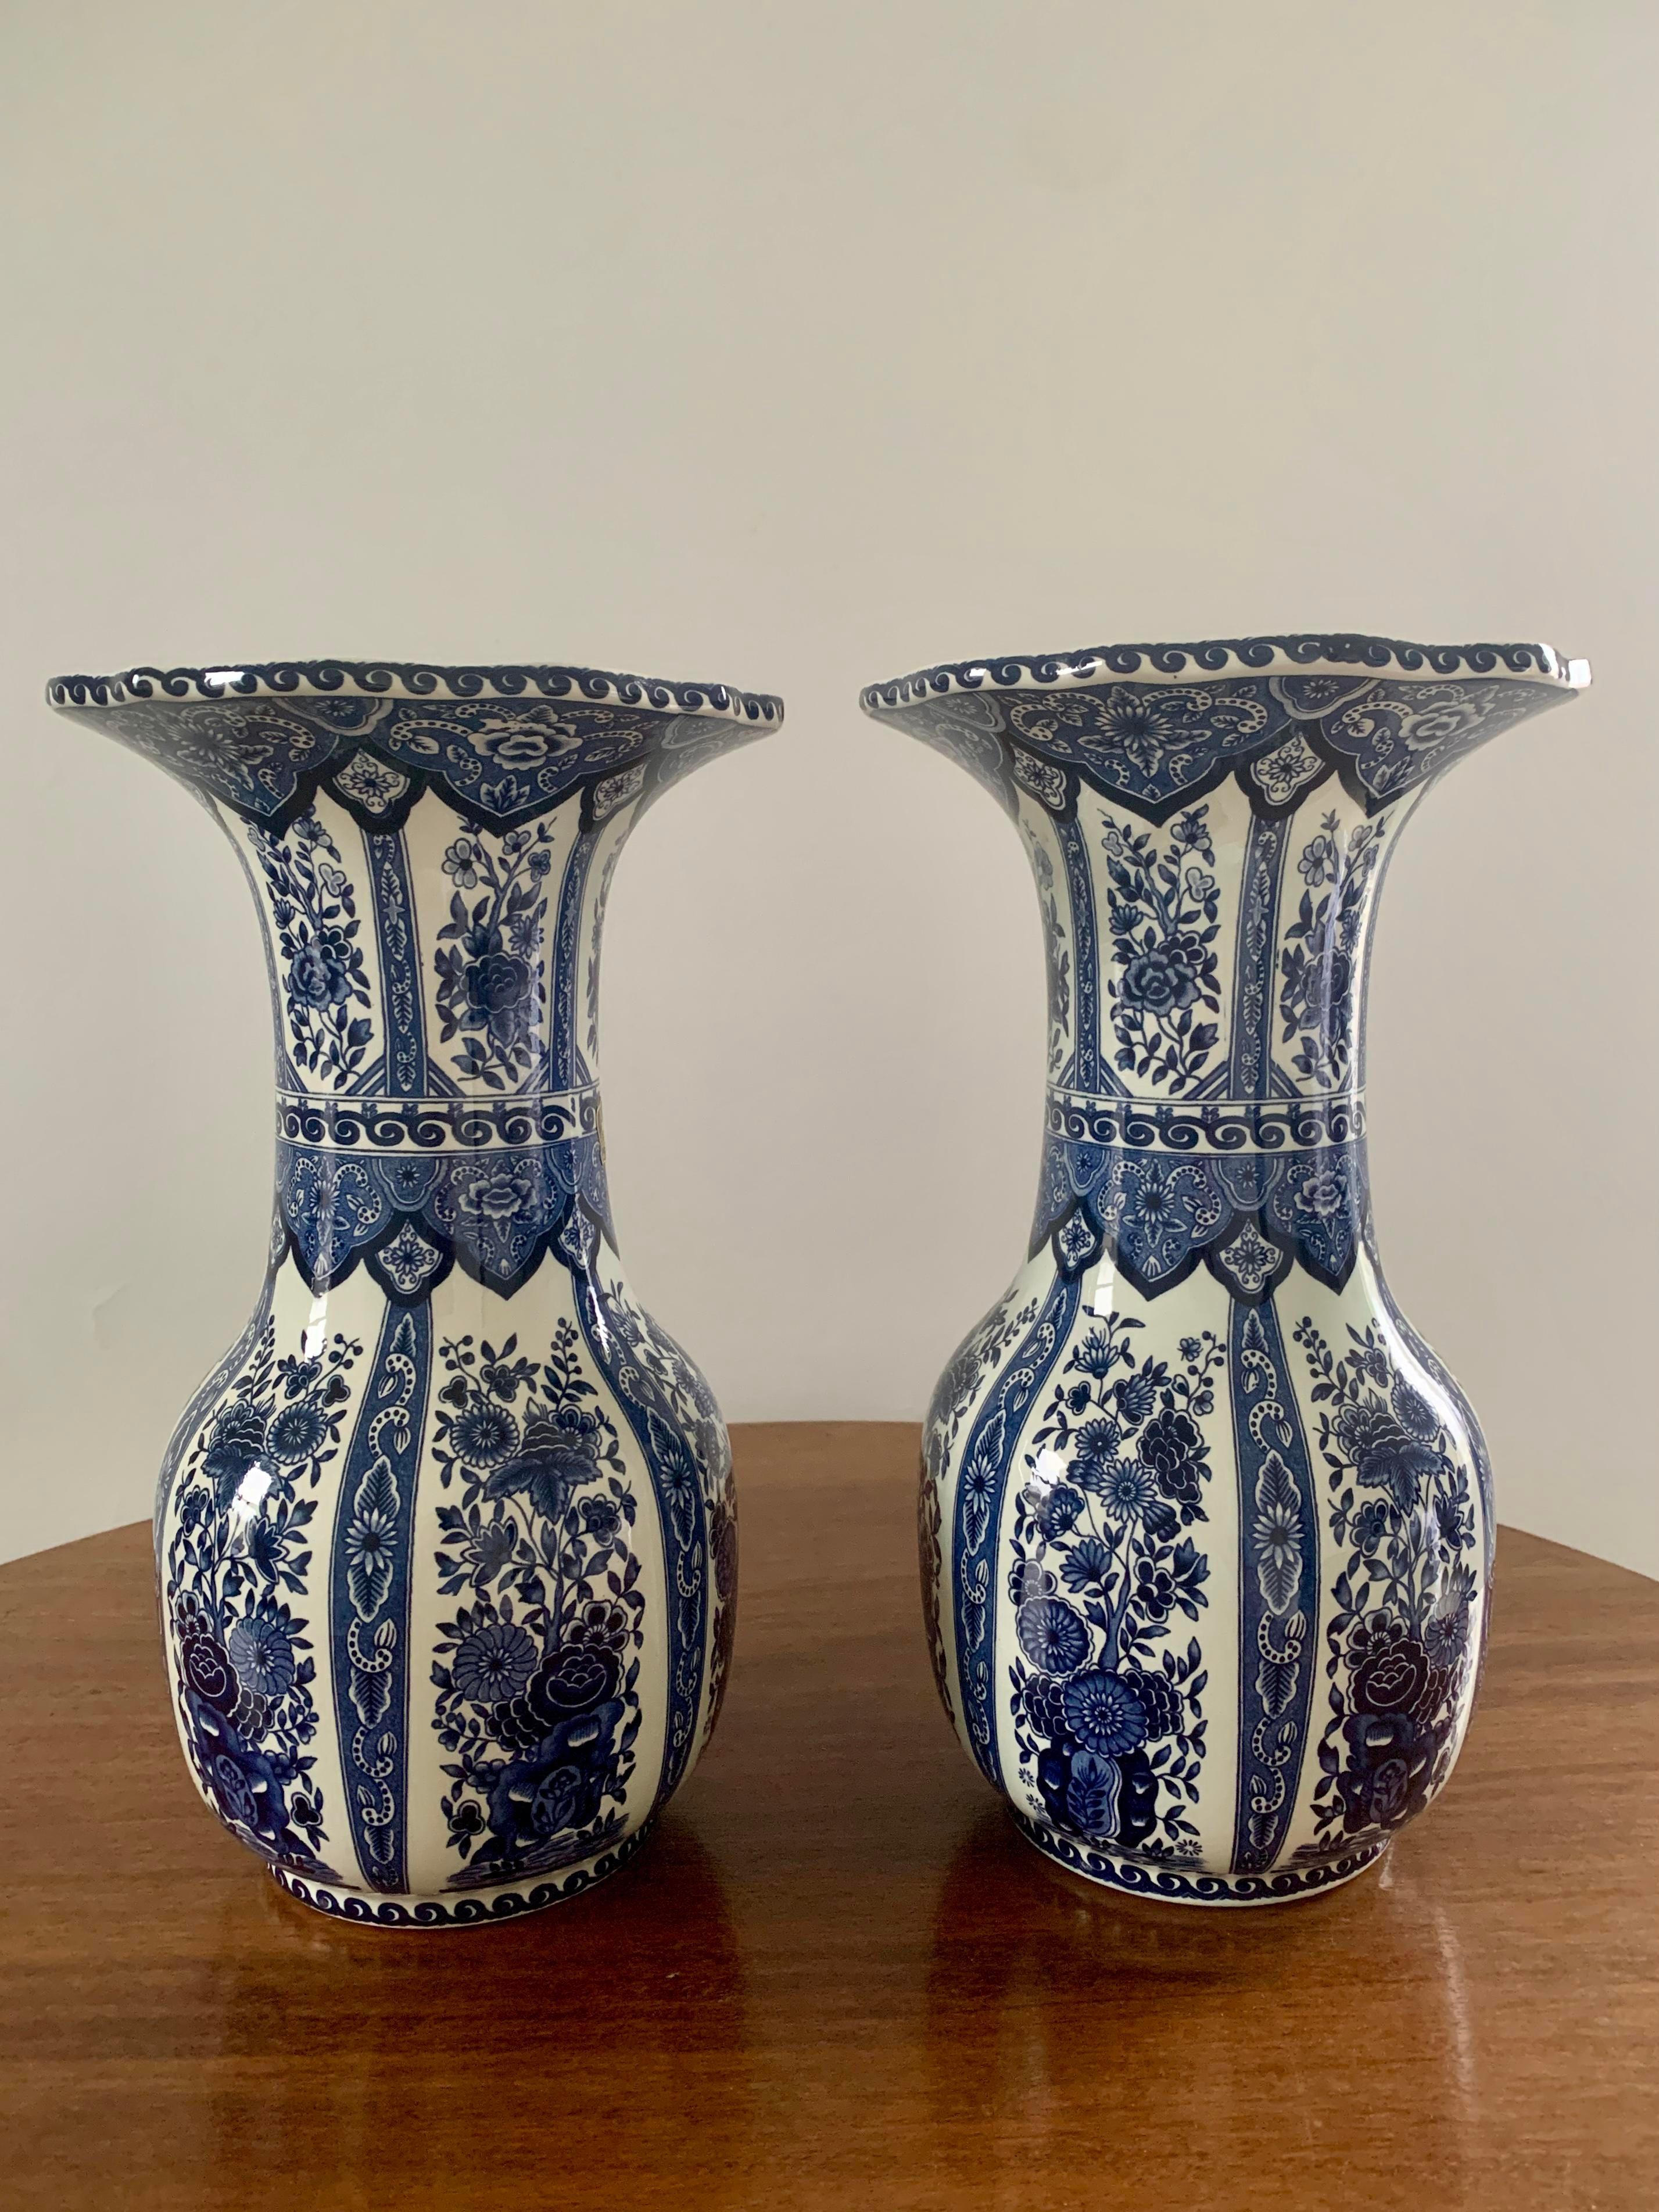 A gorgeous pair of blue and white porcelain vases

By Delfts for Royal Sphinx by Boch

Circa Mid-20th century

Measures: 7.13